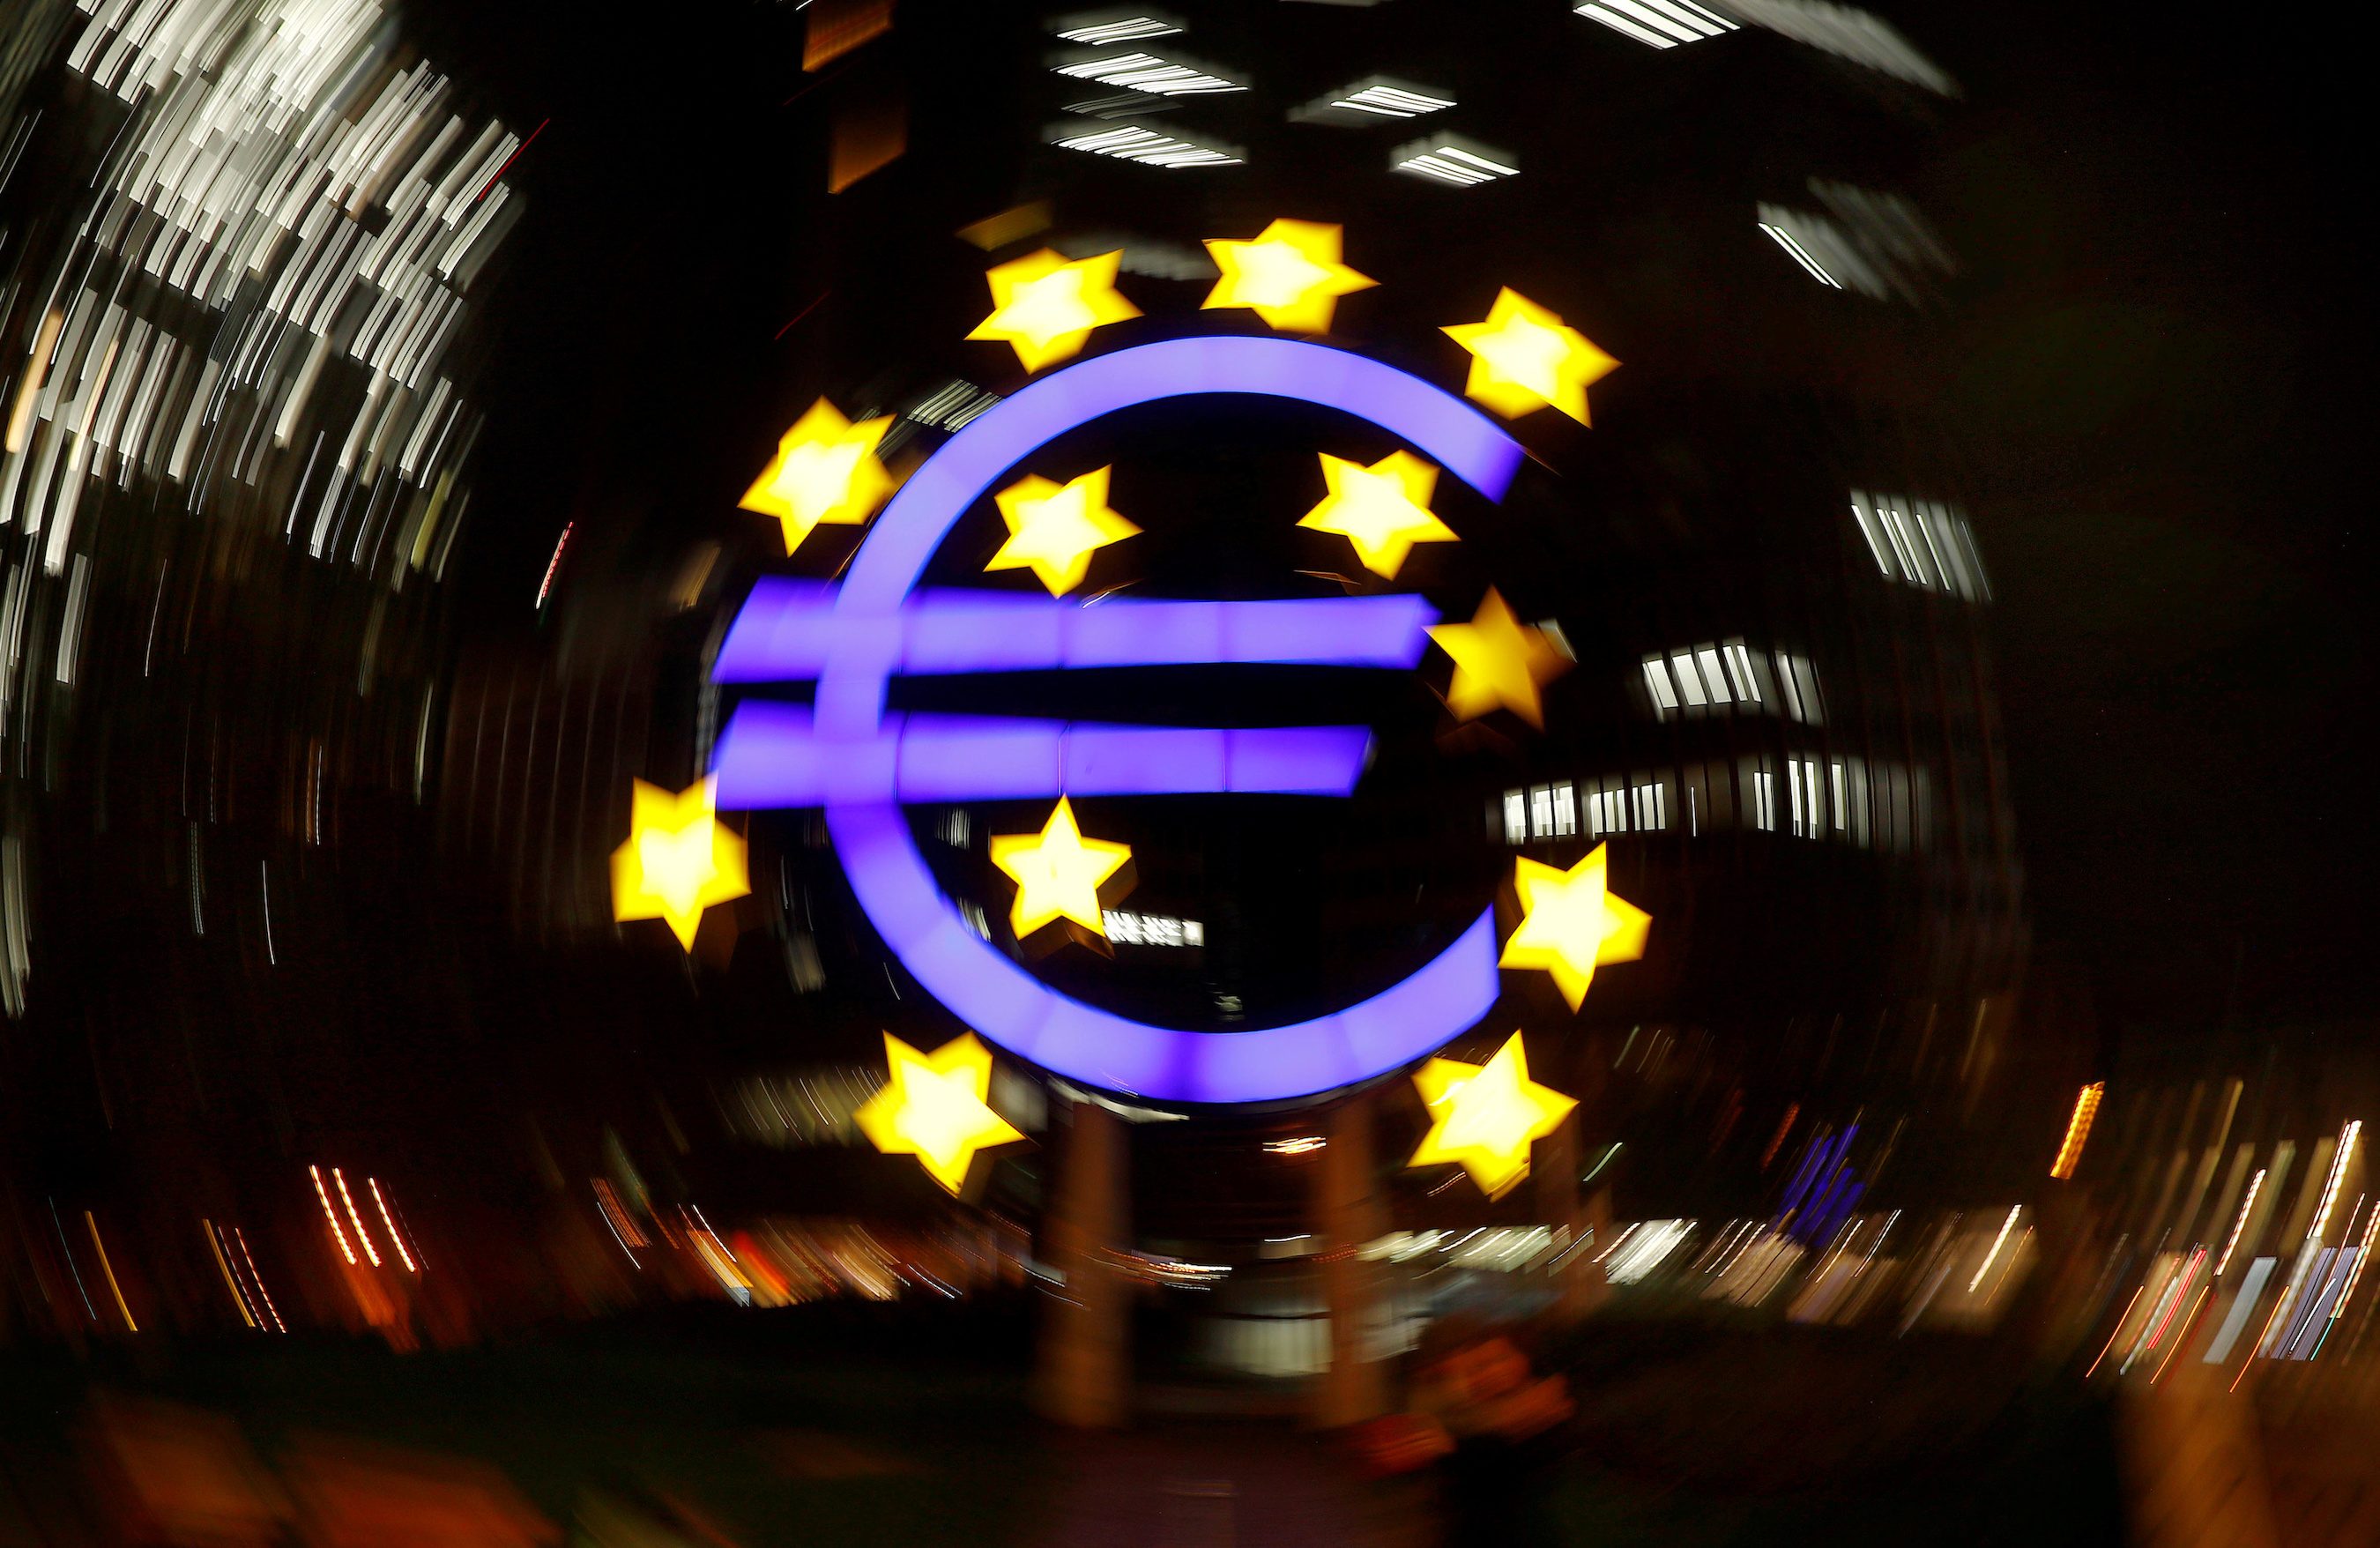 Eurozone debt surges in 2020 on pandemic spending